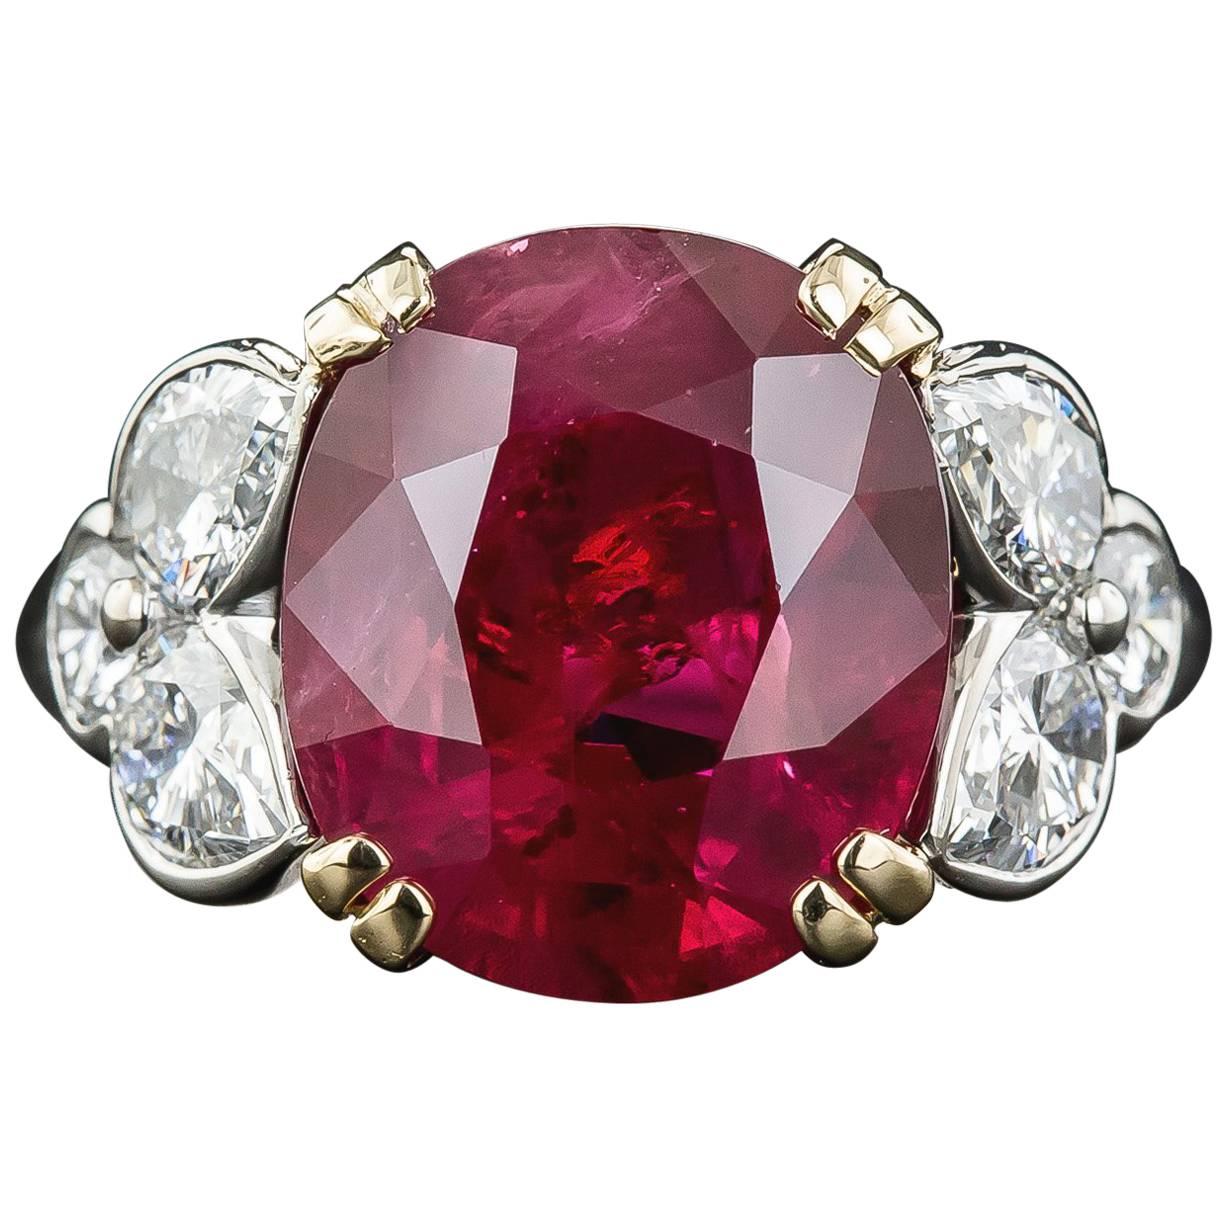 9.15 Carat GIA Certified Ruby Diamond Ring For Sale